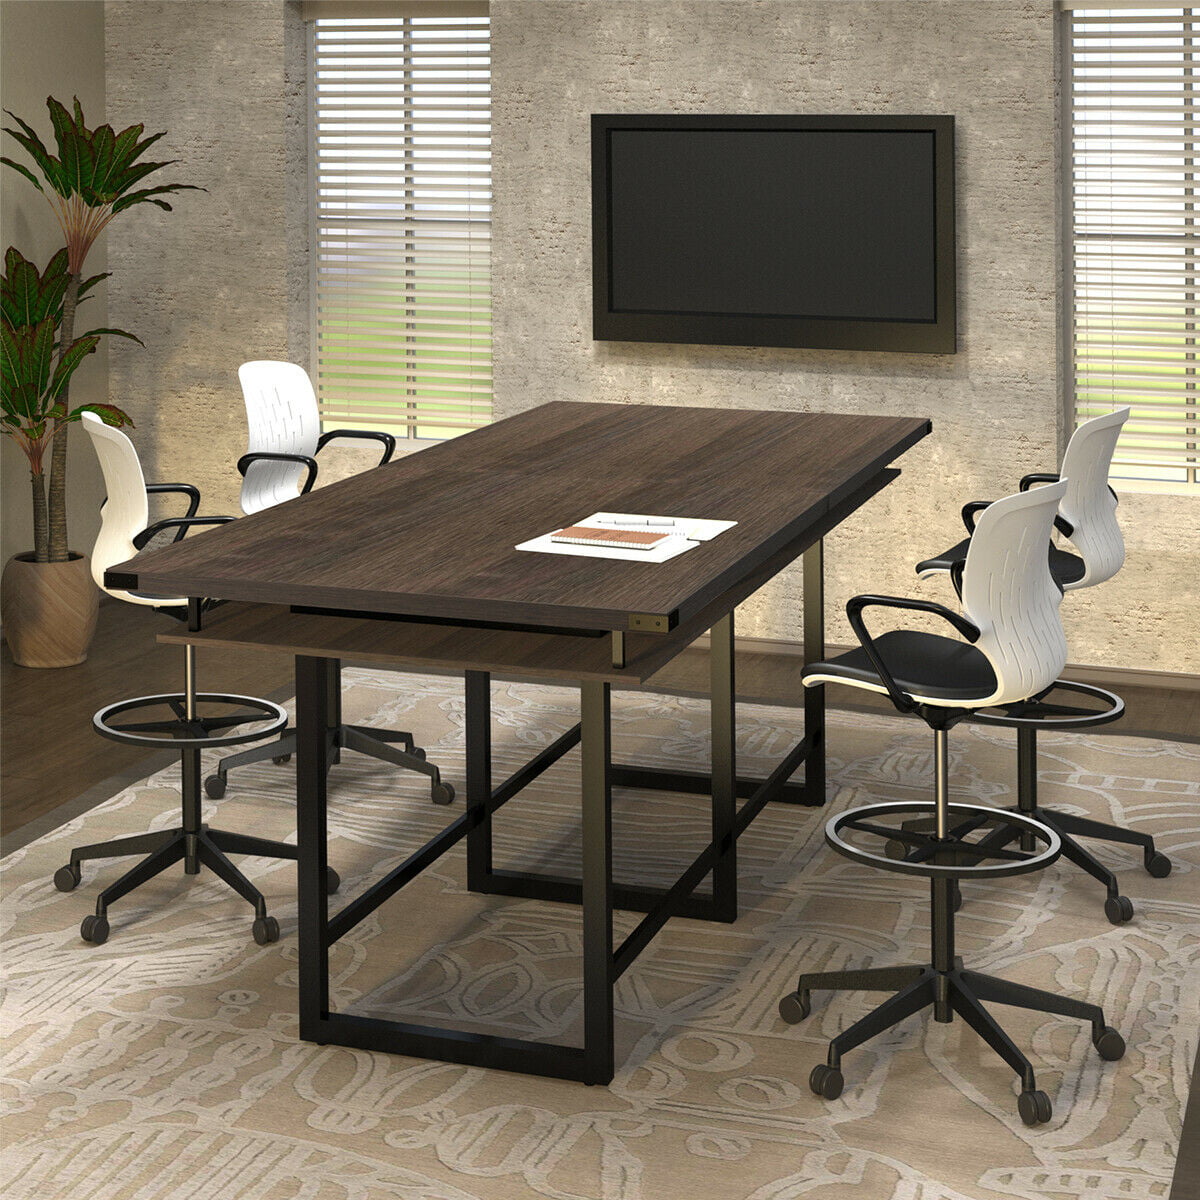 12 foot conference table - deneryX